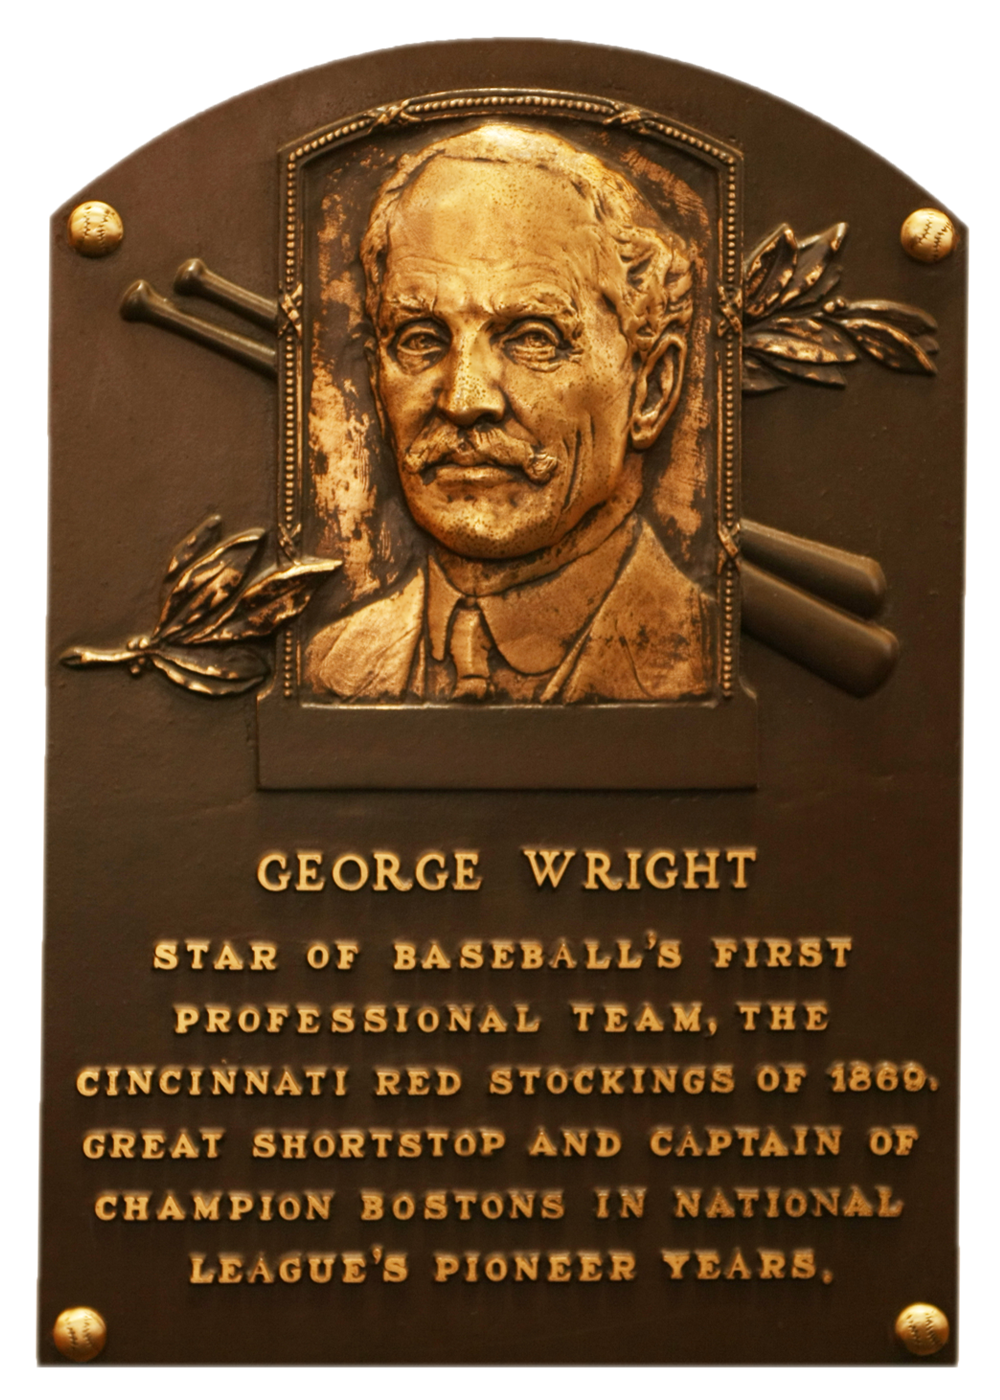 George Wright Hall of Fame plaque